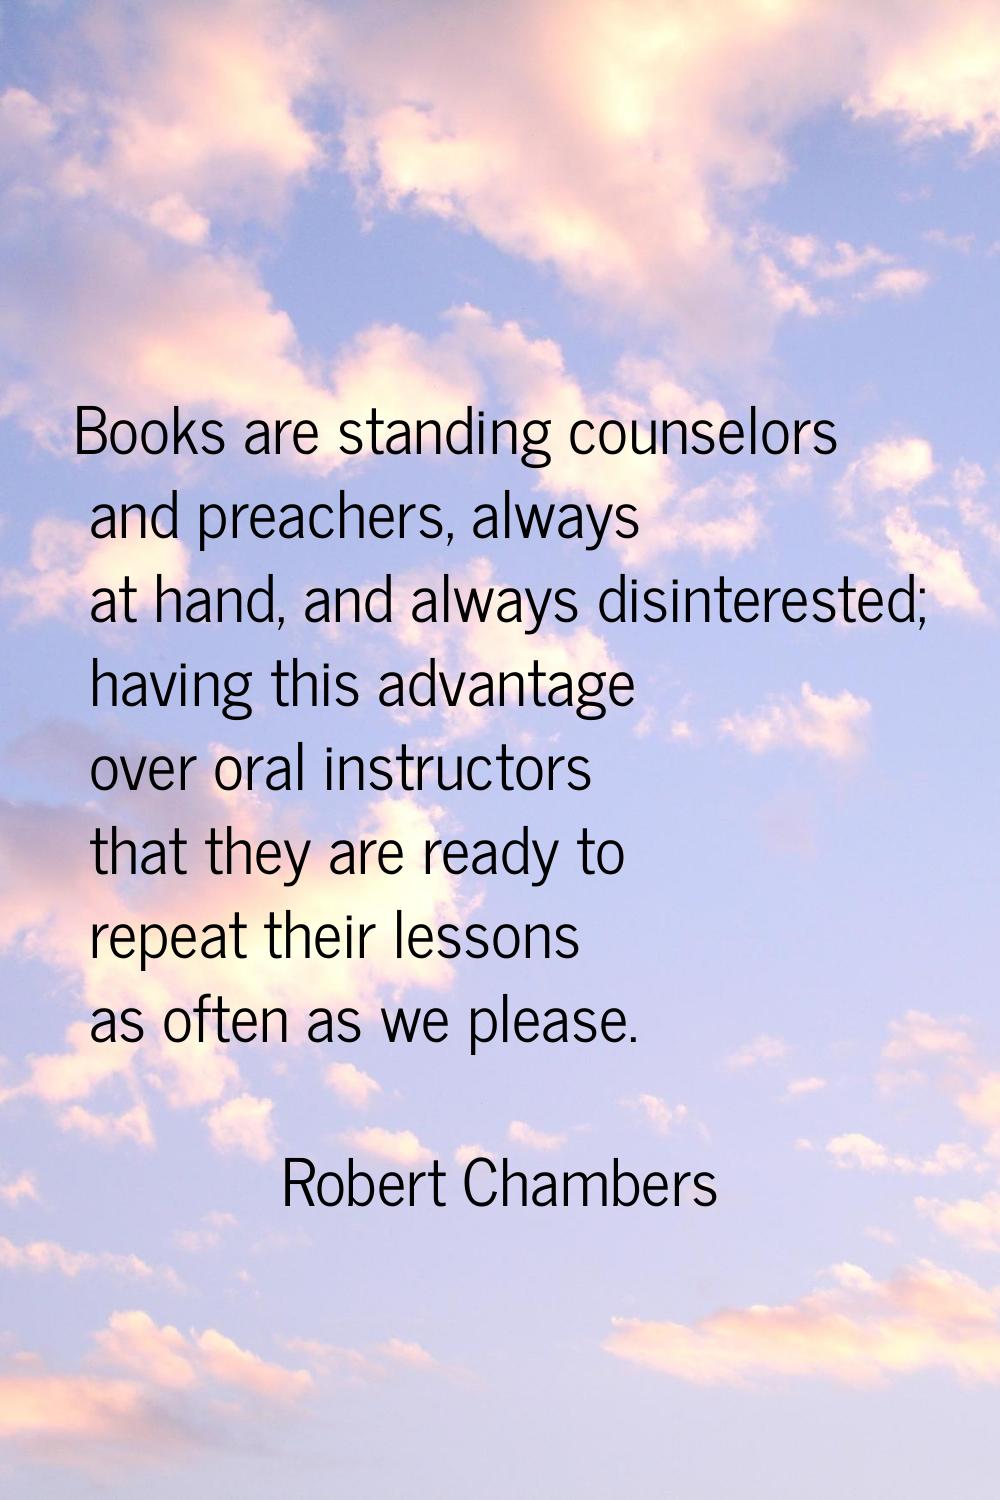 Books are standing counselors and preachers, always at hand, and always disinterested; having this 